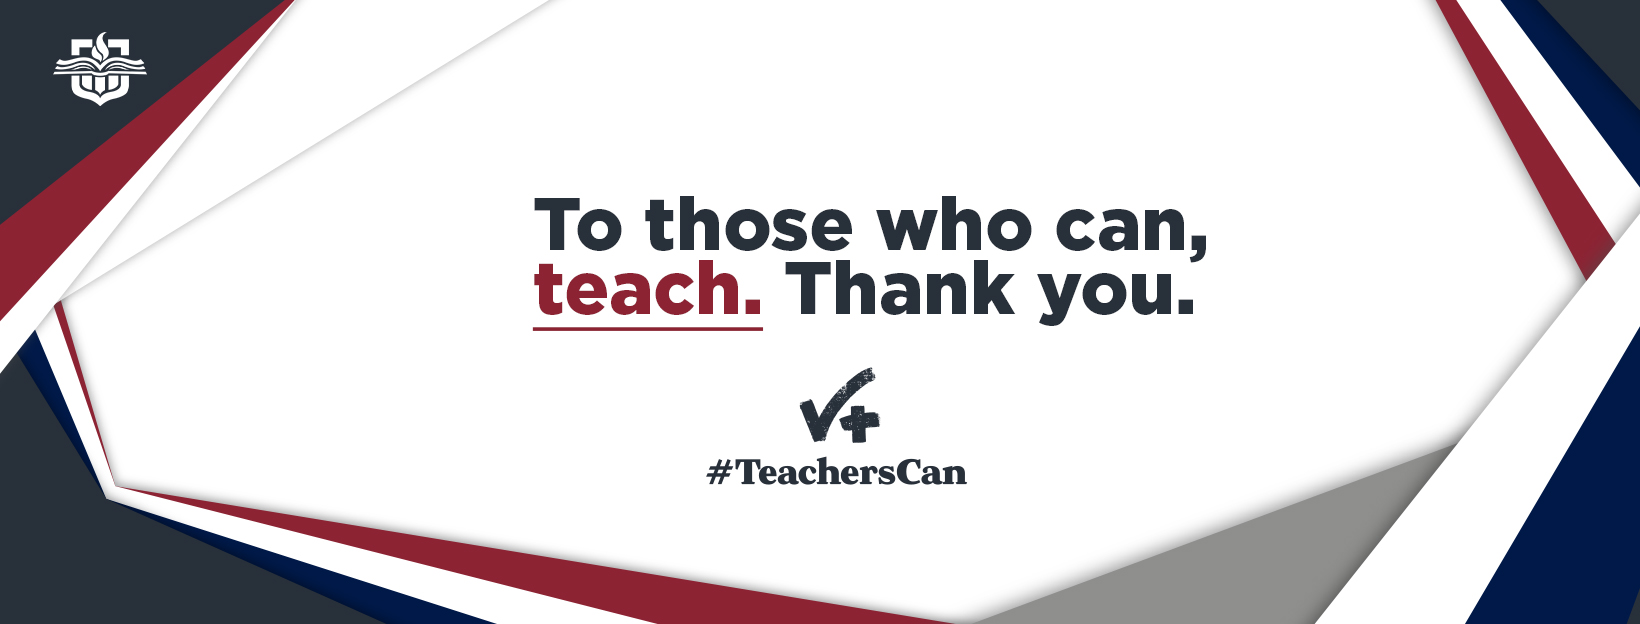 To those who can teach, thank you.